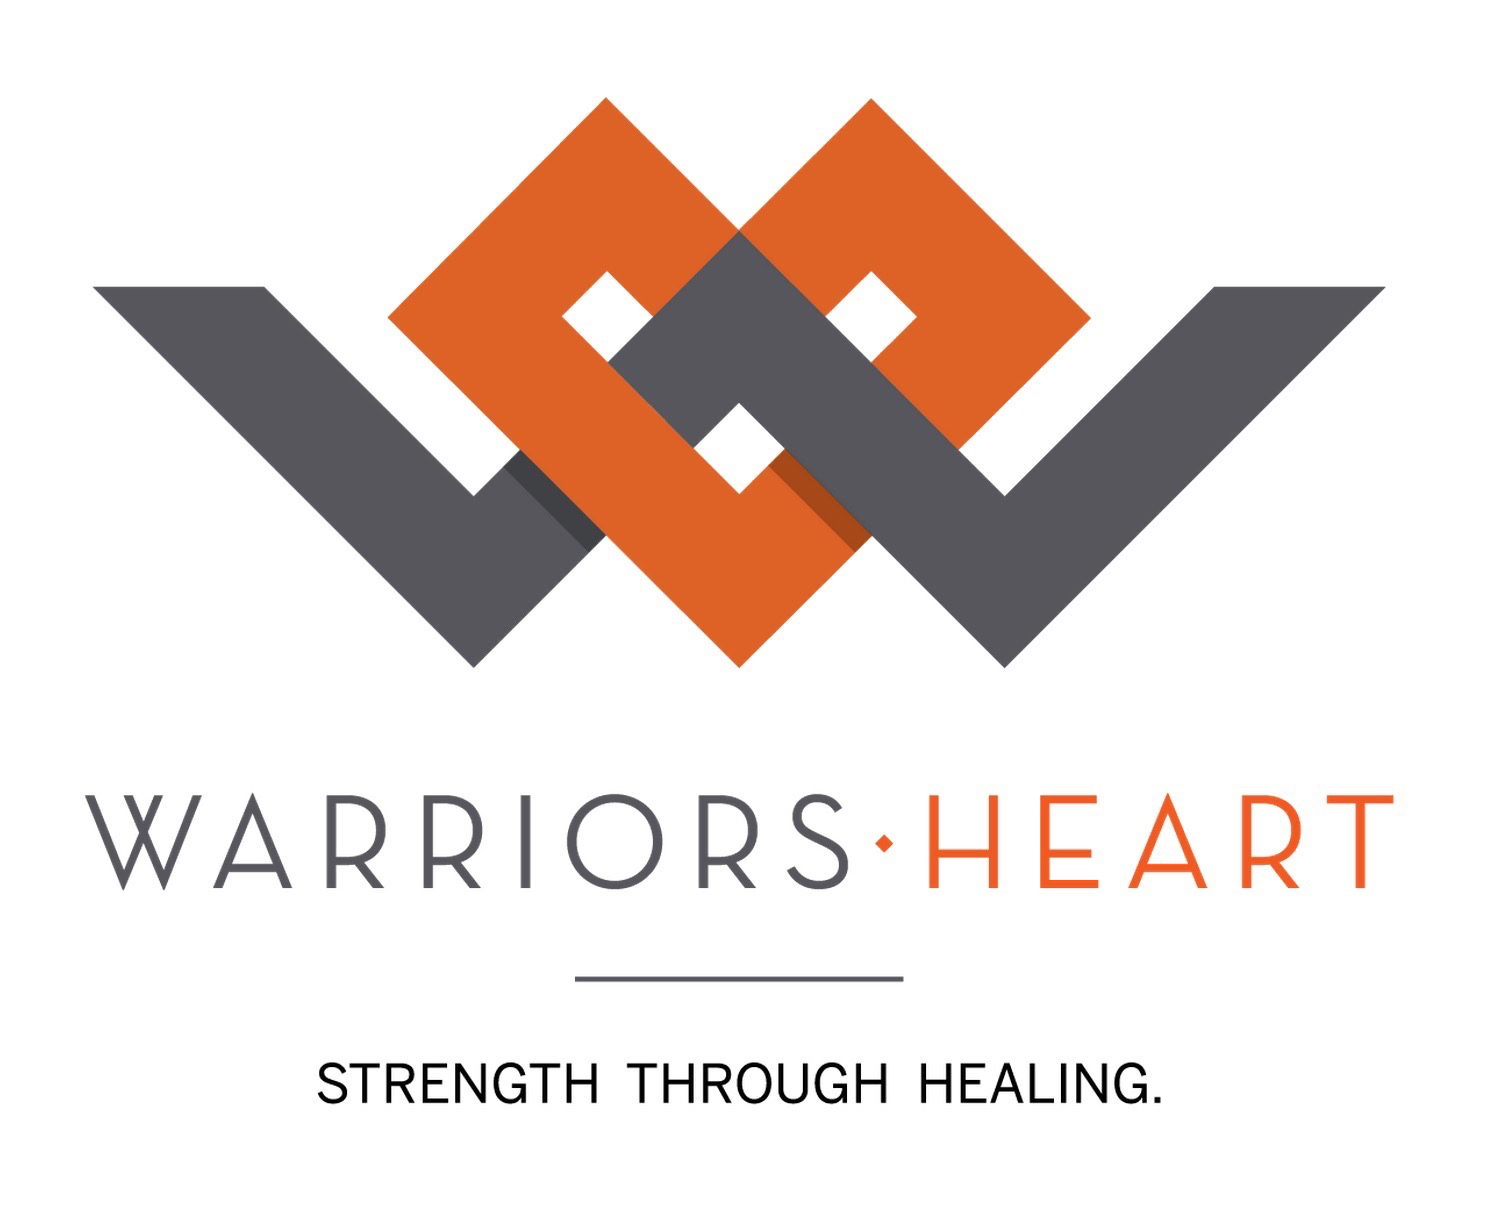 Warriors Heart the first and ONLY private and accredited residential treatment program in the U.S. exclusively for “warriors” (active-duty military, veterans, first responders, and EMTs/paramedics).